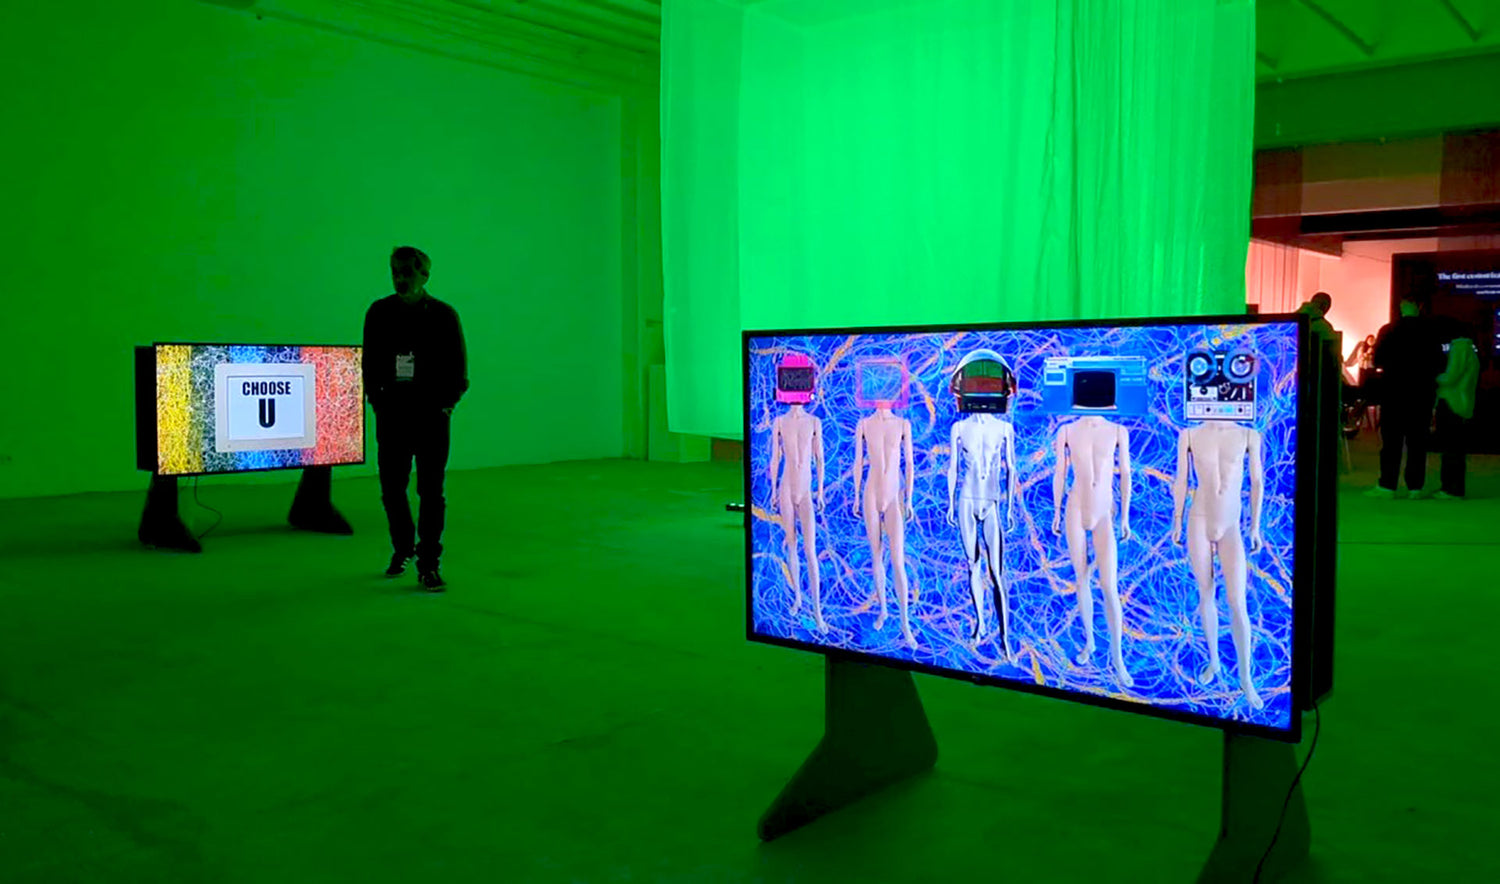 Digital Art exhibition gallery in Lisbon with two screens showing videos